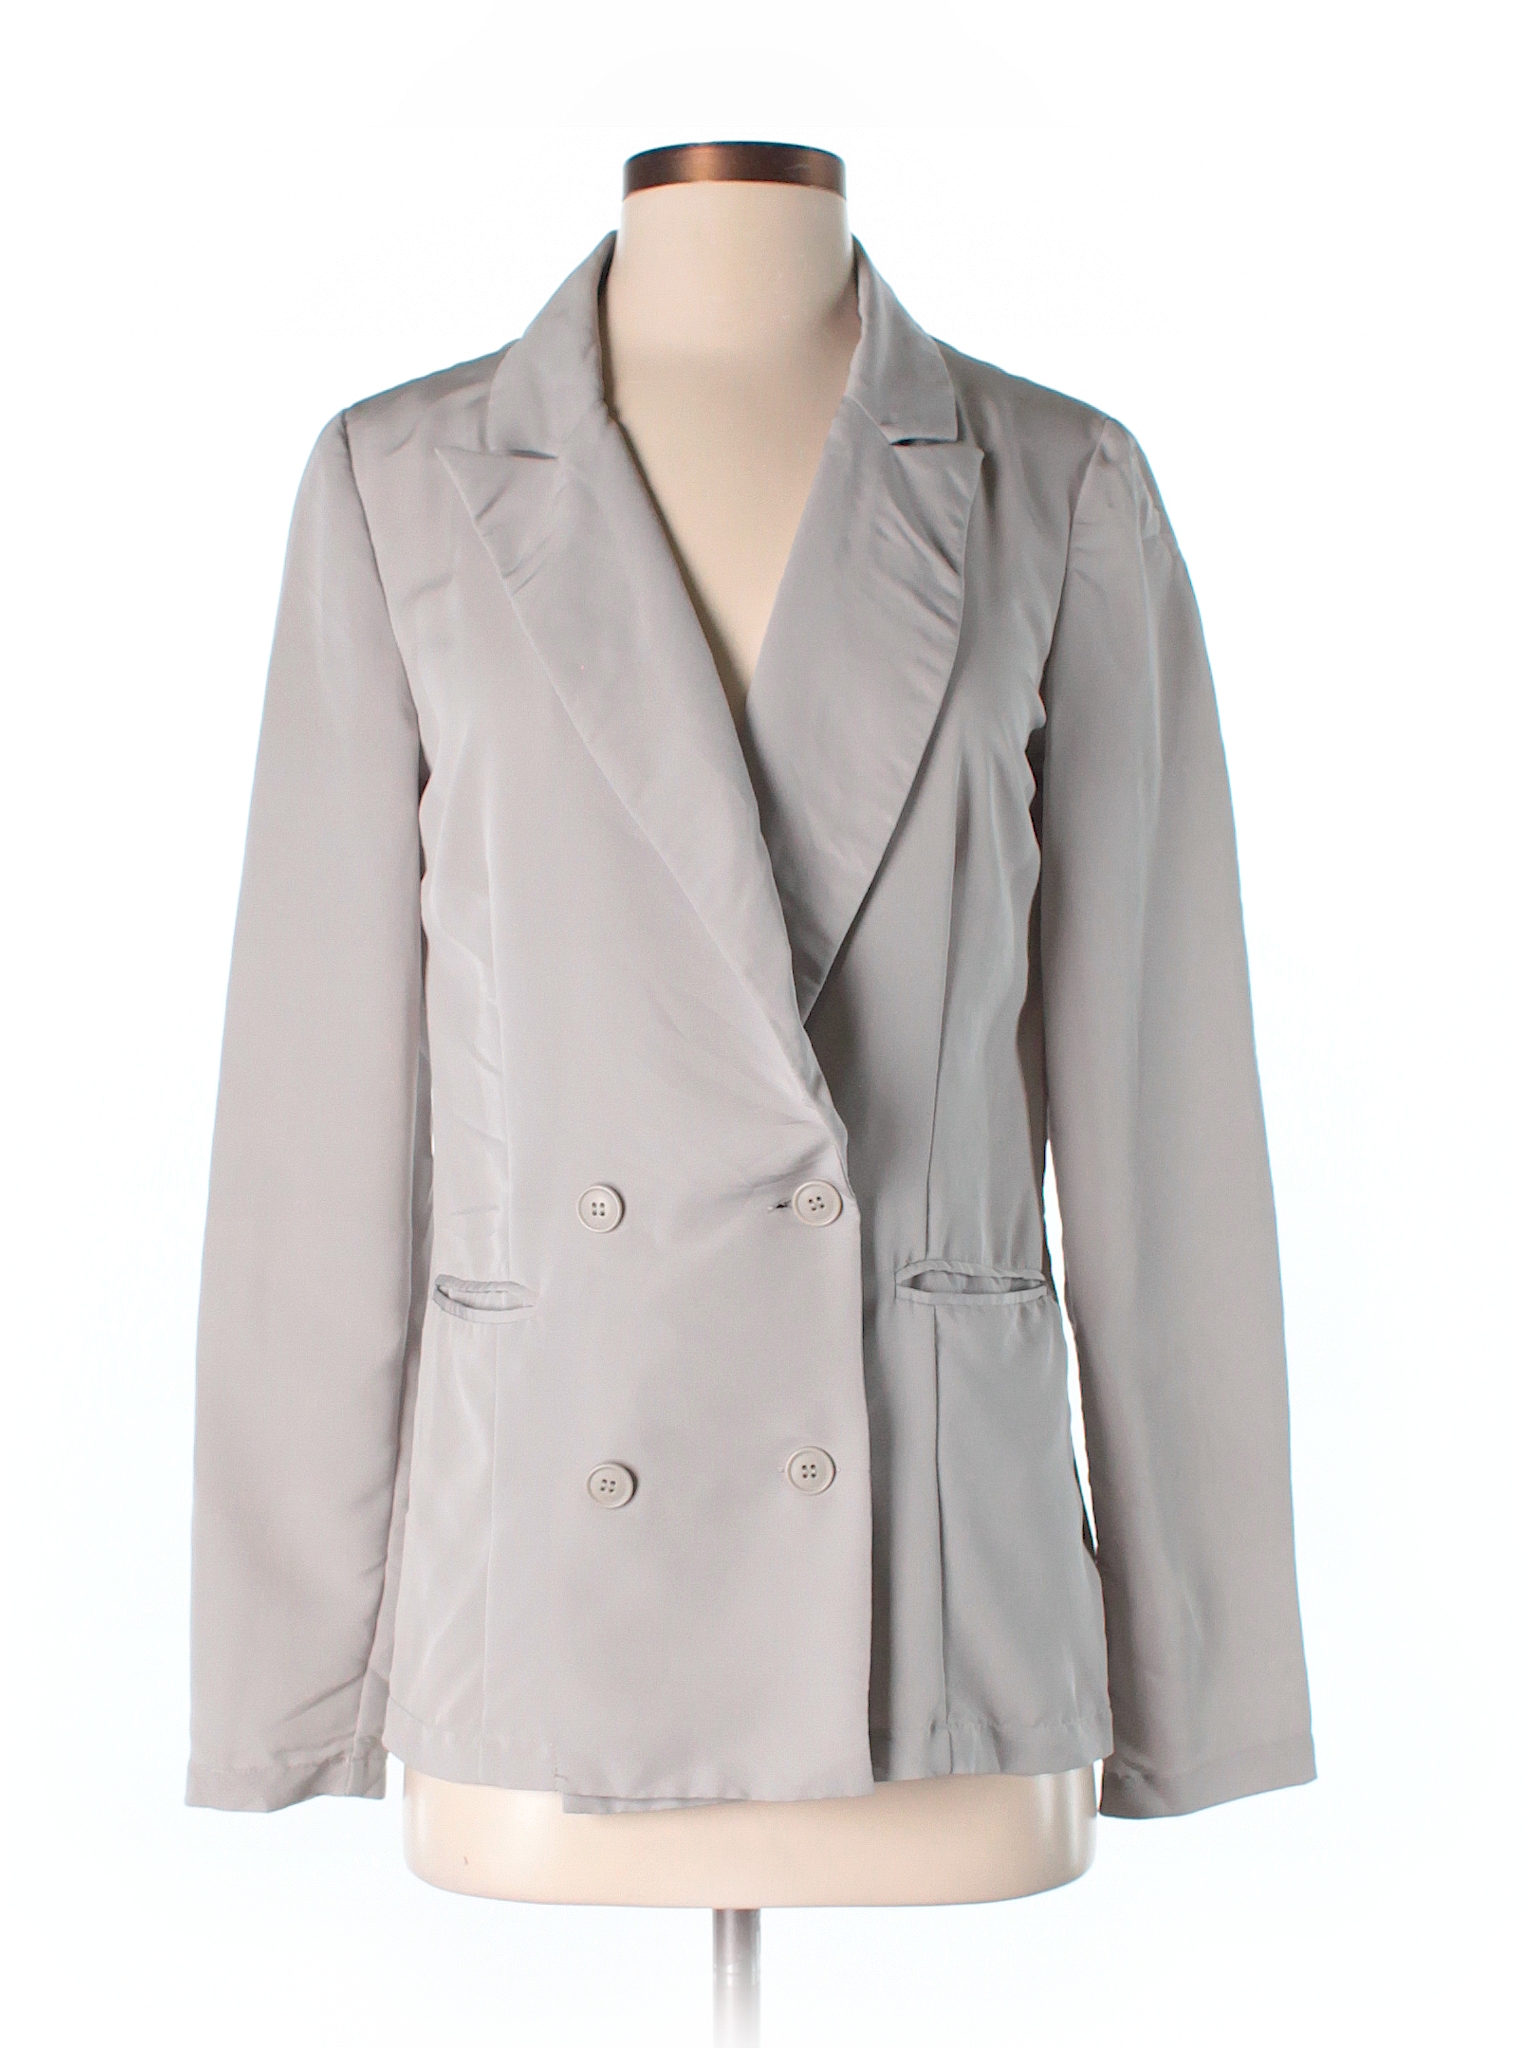 Silence And Noise Blazer - 98% off only on thredUP